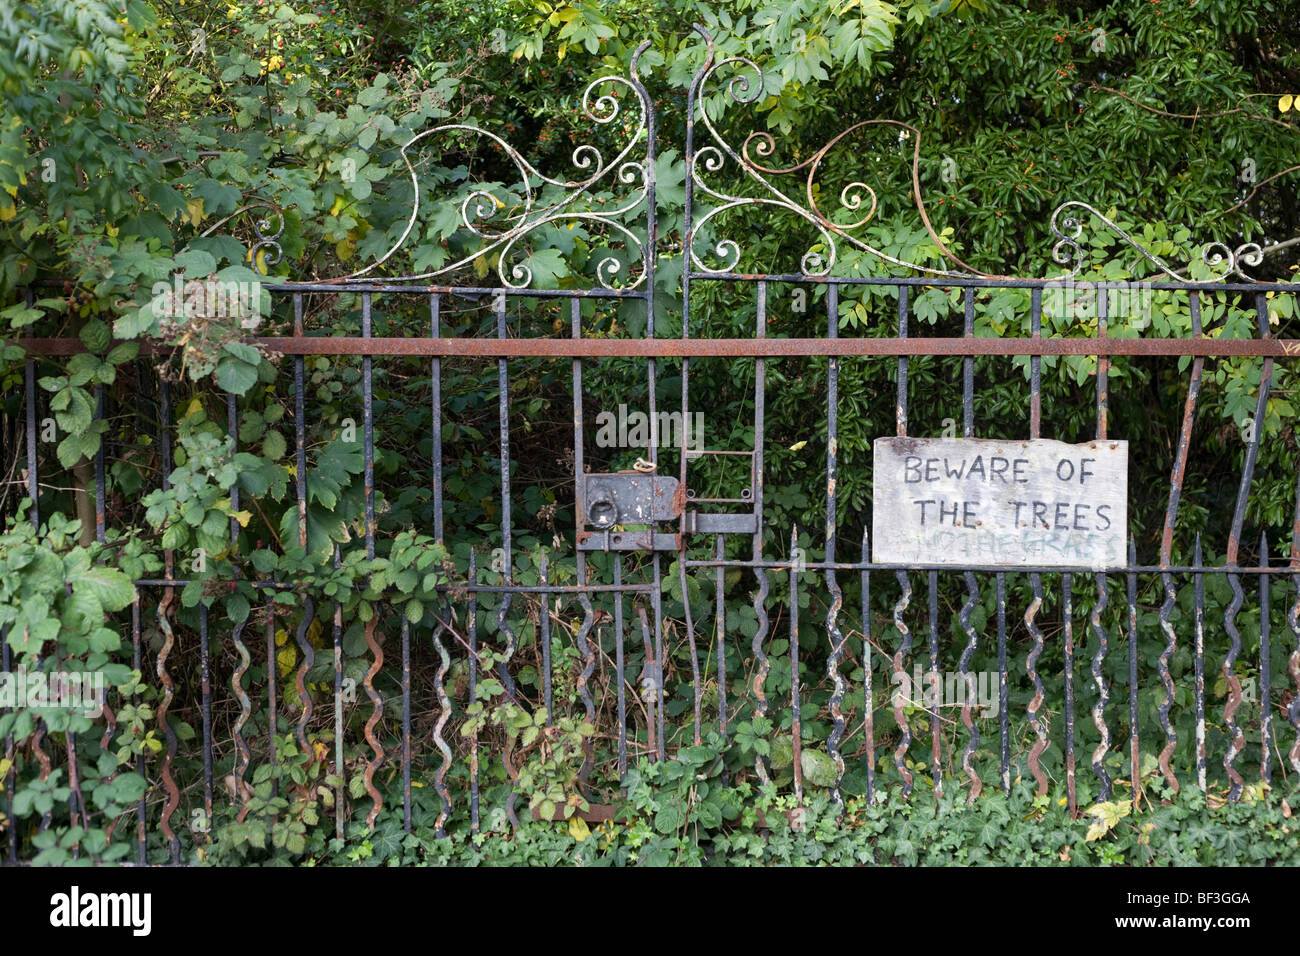 An incongruously ironic statement is written on rusting wrought-iron gates alerting people to the danger of London trees. Stock Photo